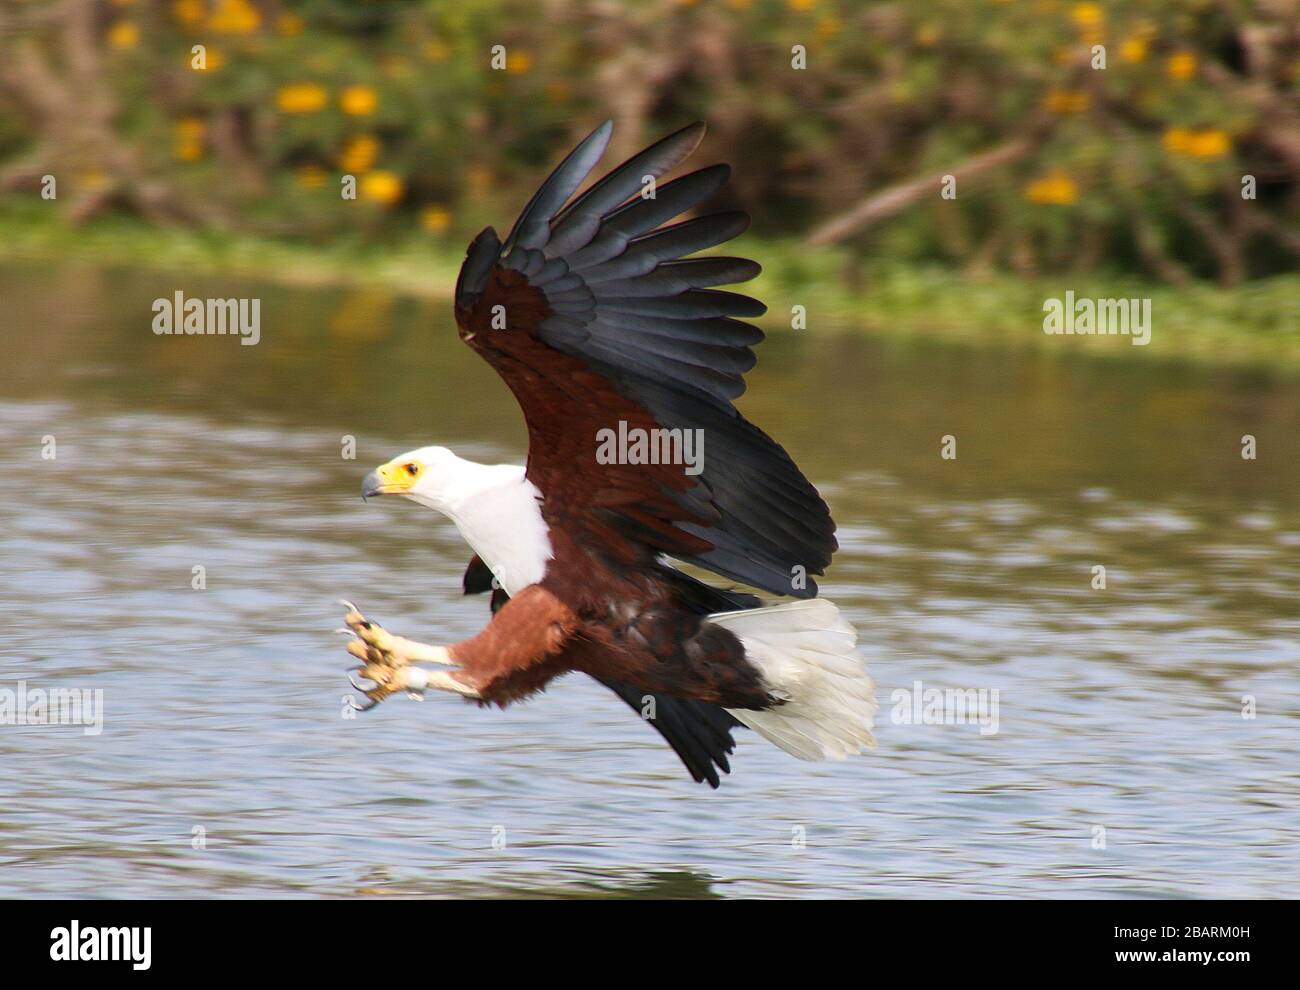 African fish eagle (Haliaeetus vocifer) in flight with a fish in its talons. This bird is found in sub-Saharan Africa near water. The female, the larg Stock Photo